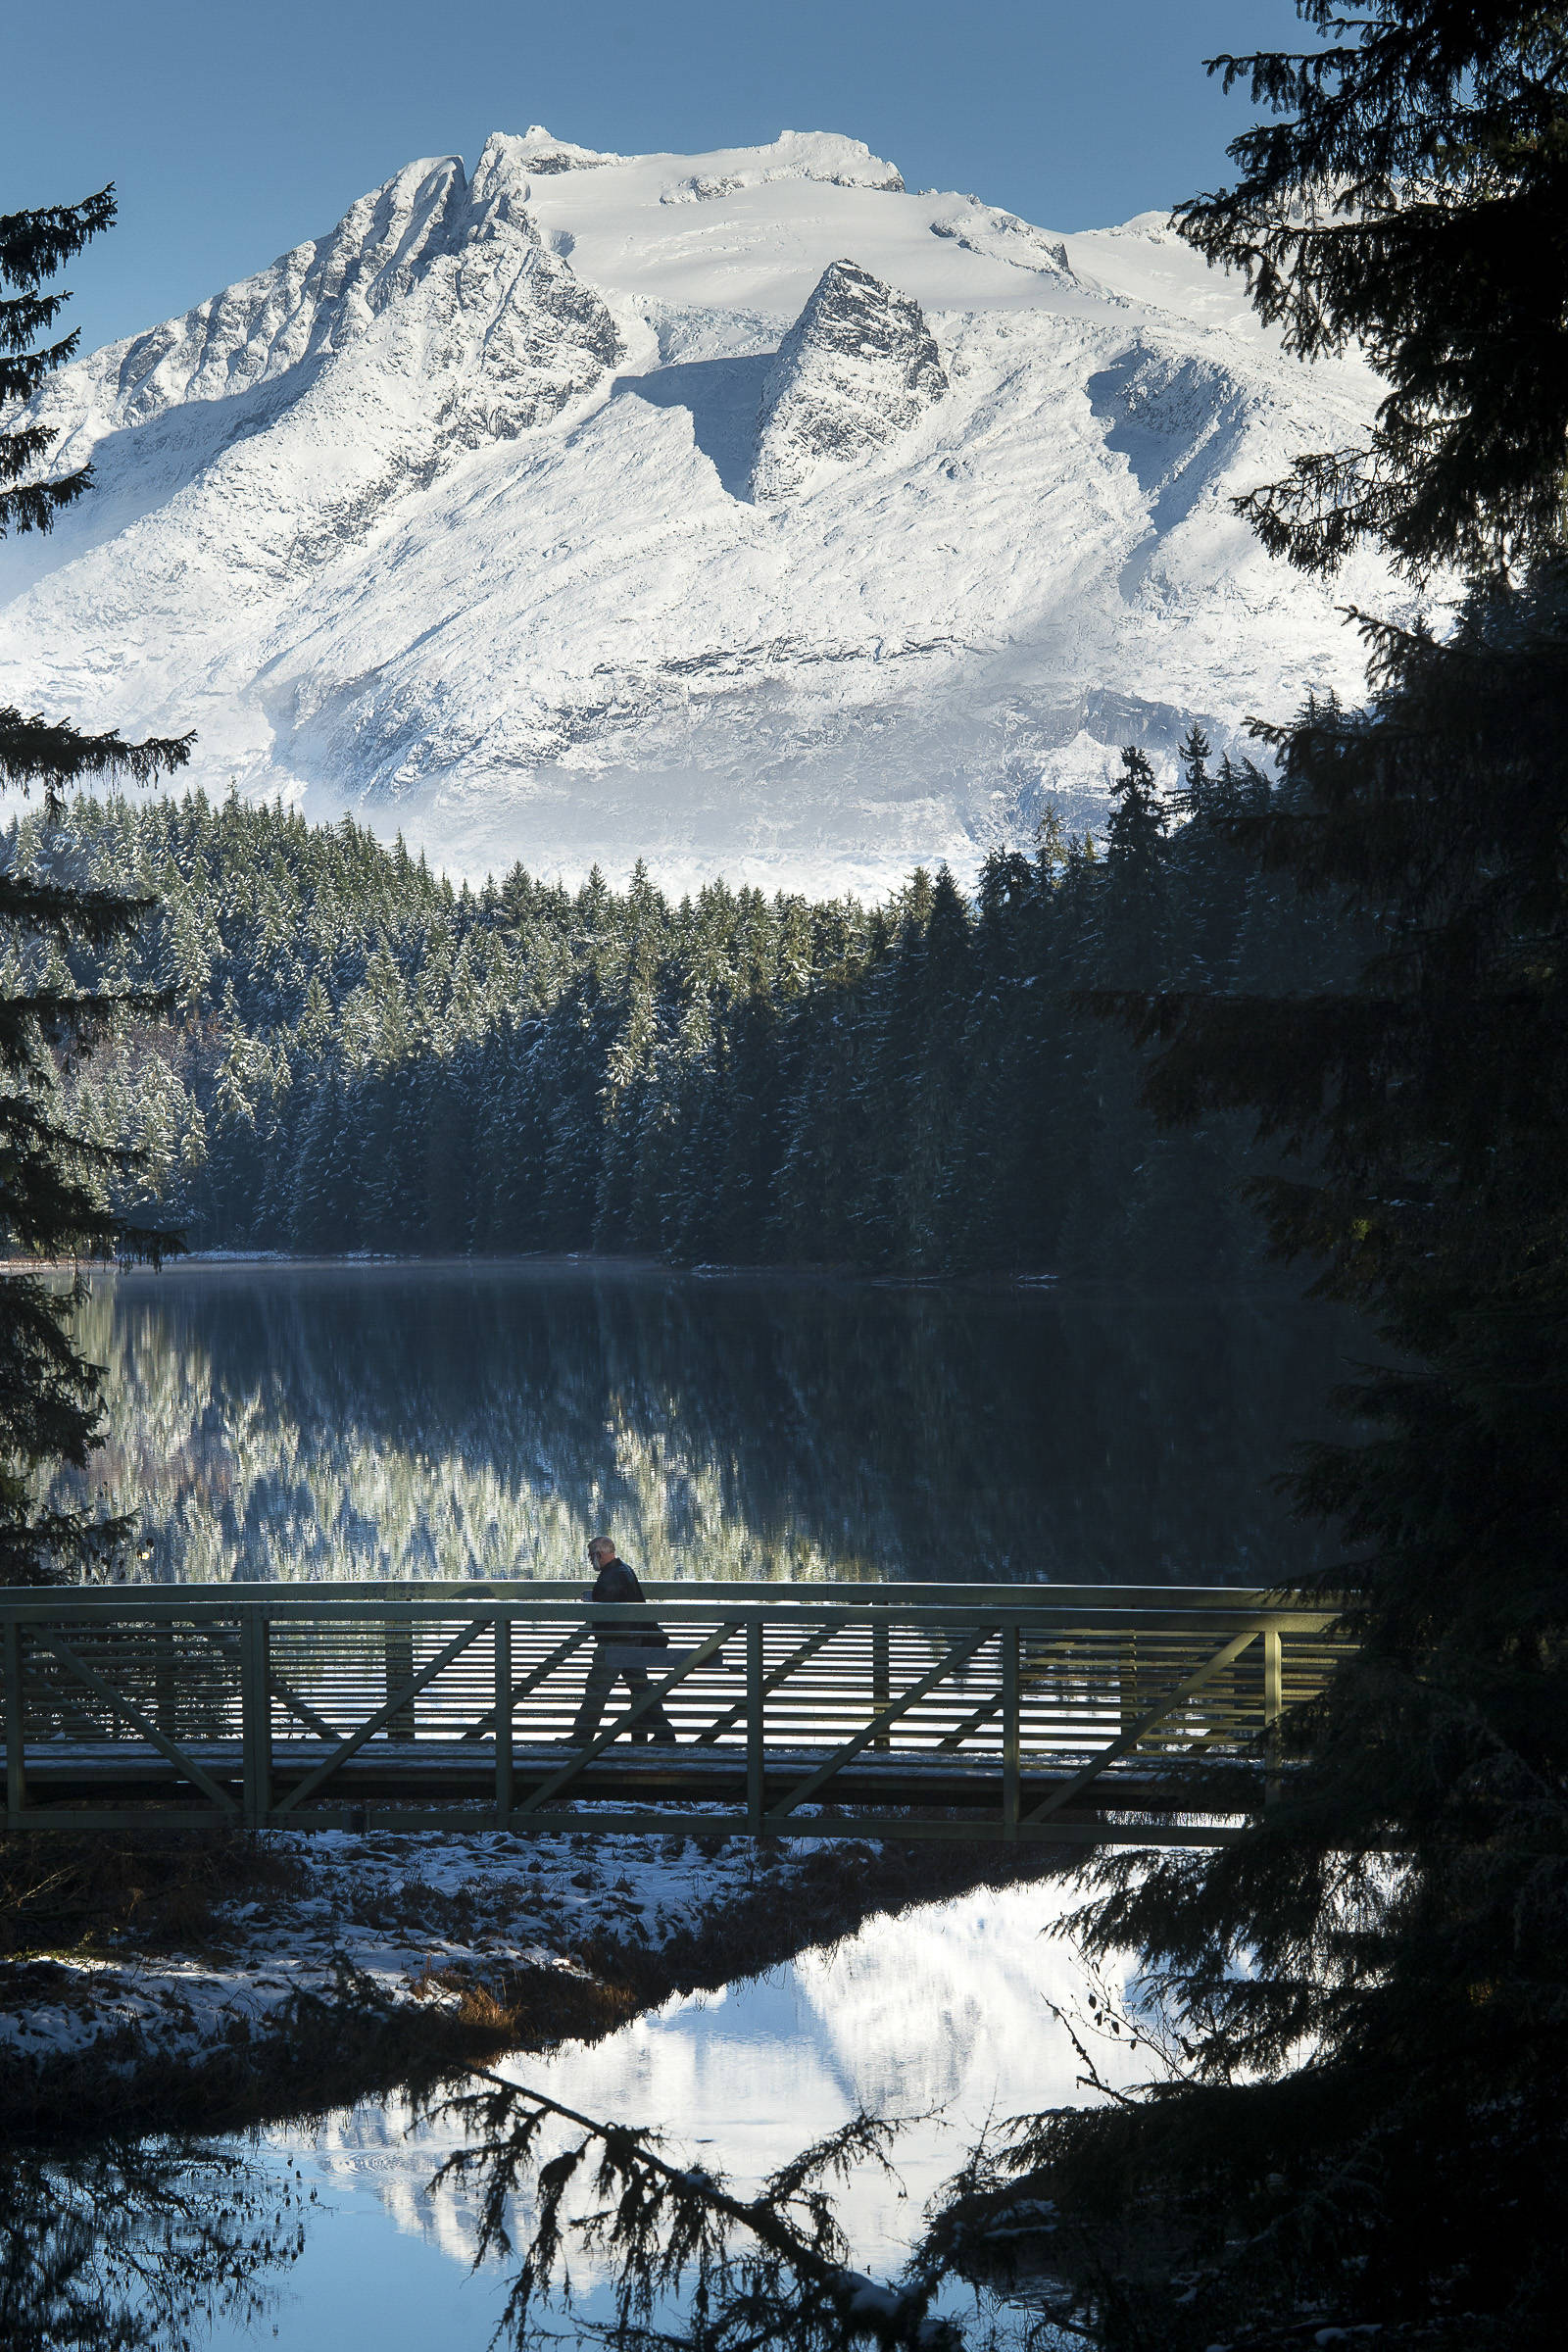 A pedestrian crosses the bridge at Auke Lake on Monday, Nov. 5, 2018. The National Weather Service forecasts clear skies through Wednesday with highs in the upper 30s. (Michael Penn | Juneau Empire)